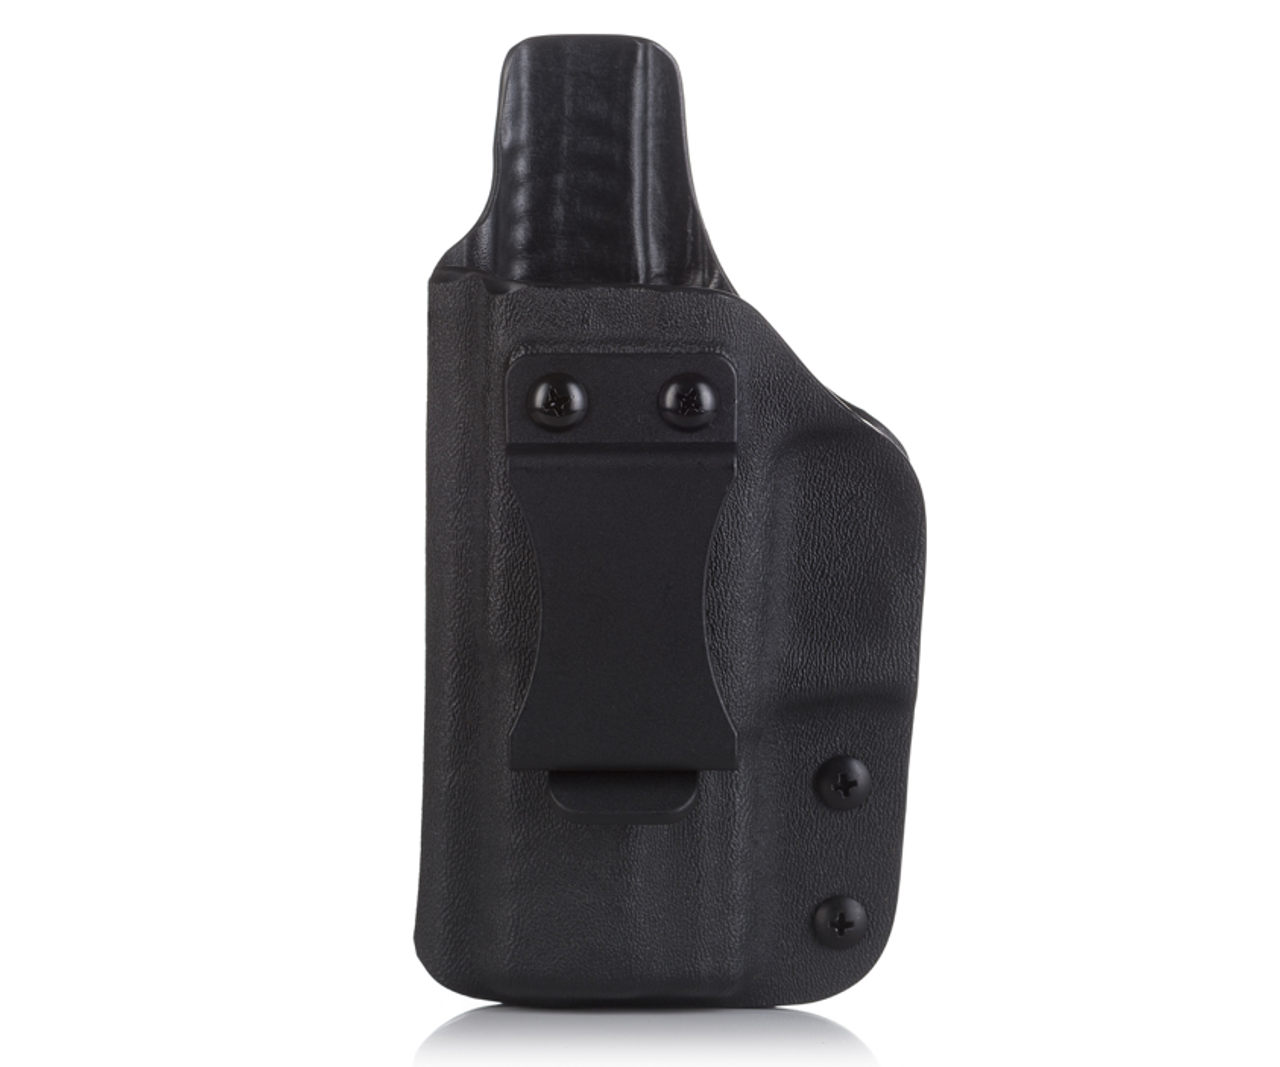 FALCO Open-Top Kydex Holster for Grand Power Q100